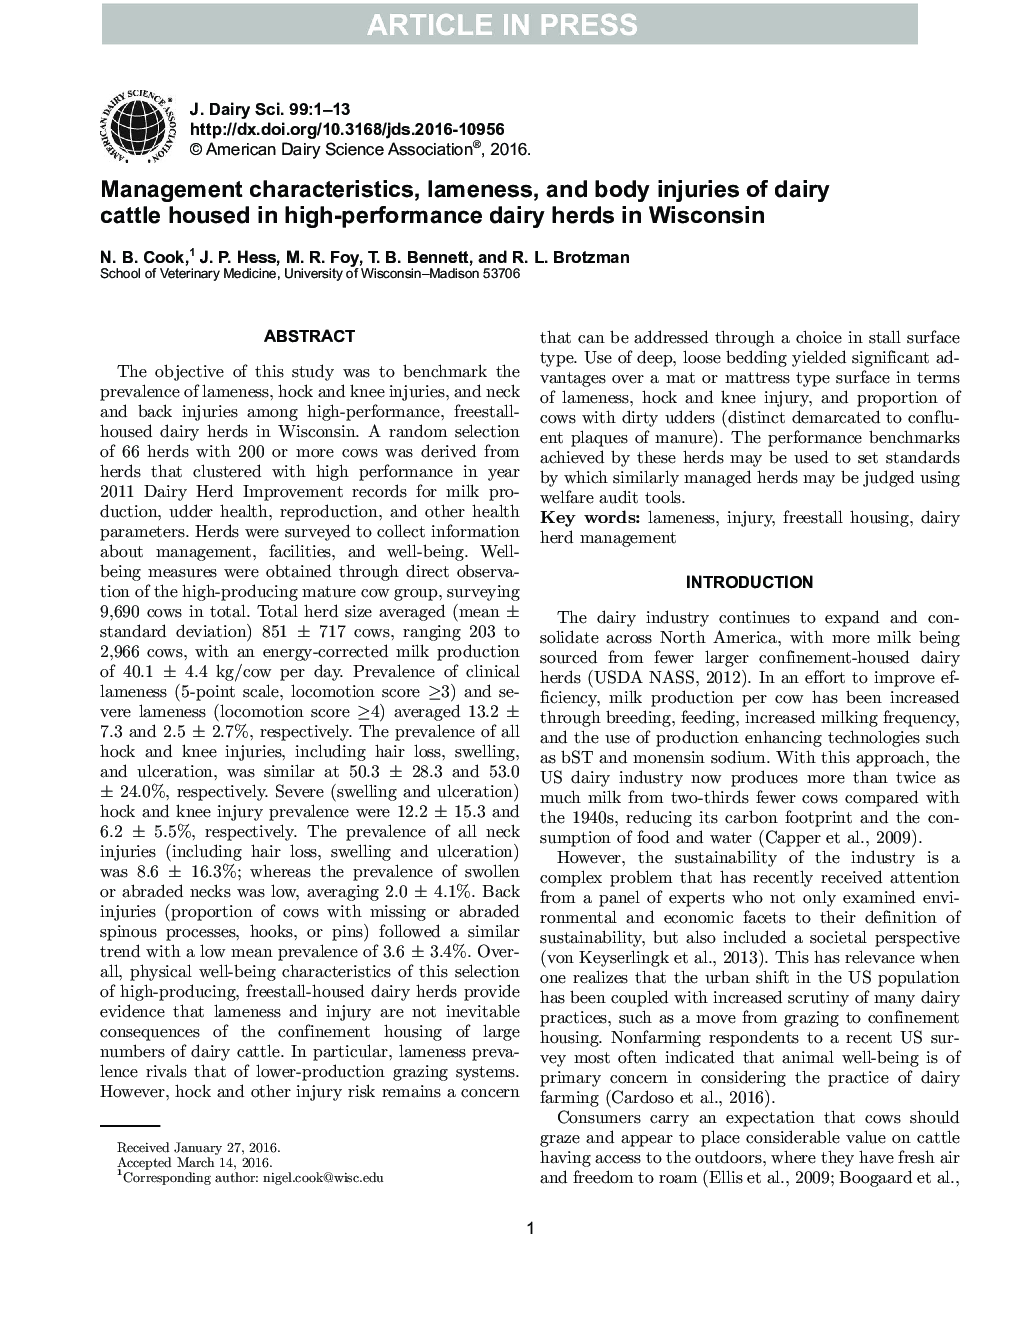 Management characteristics, lameness, and body injuries of dairy cattle housed in high-performance dairy herds in Wisconsin